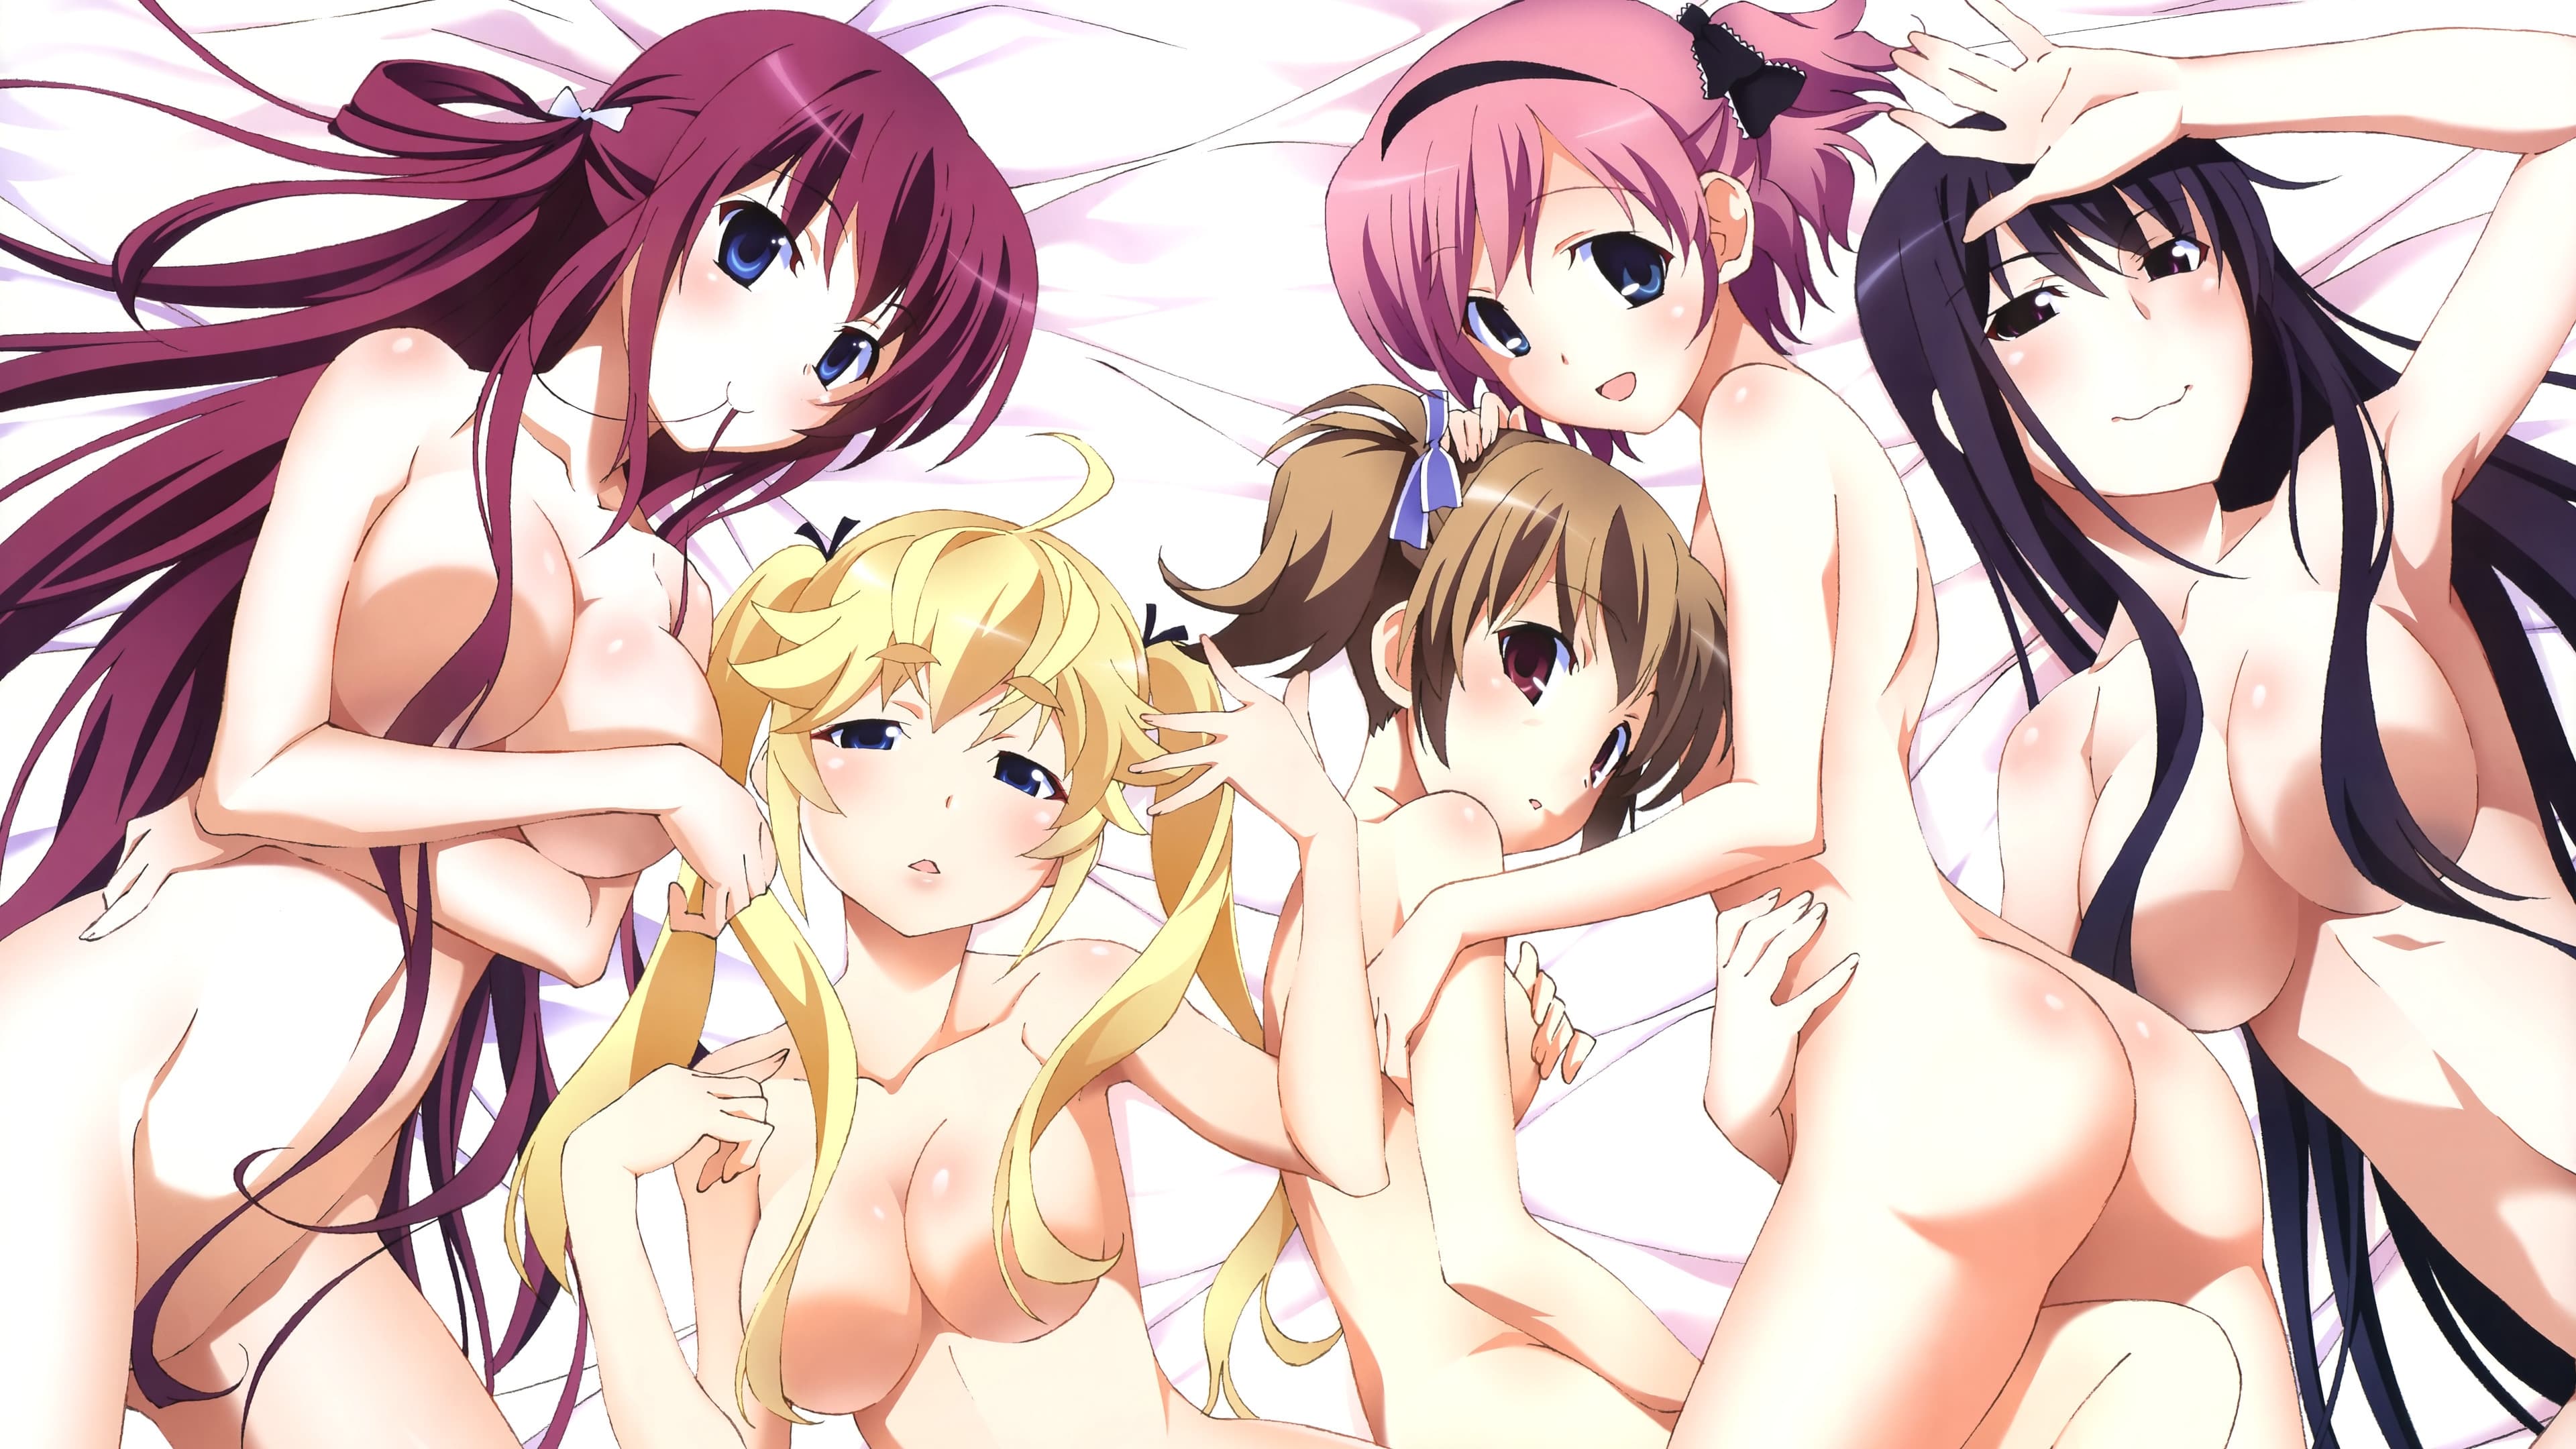 The Fruit of Grisaia: The Eden of Grisaia.